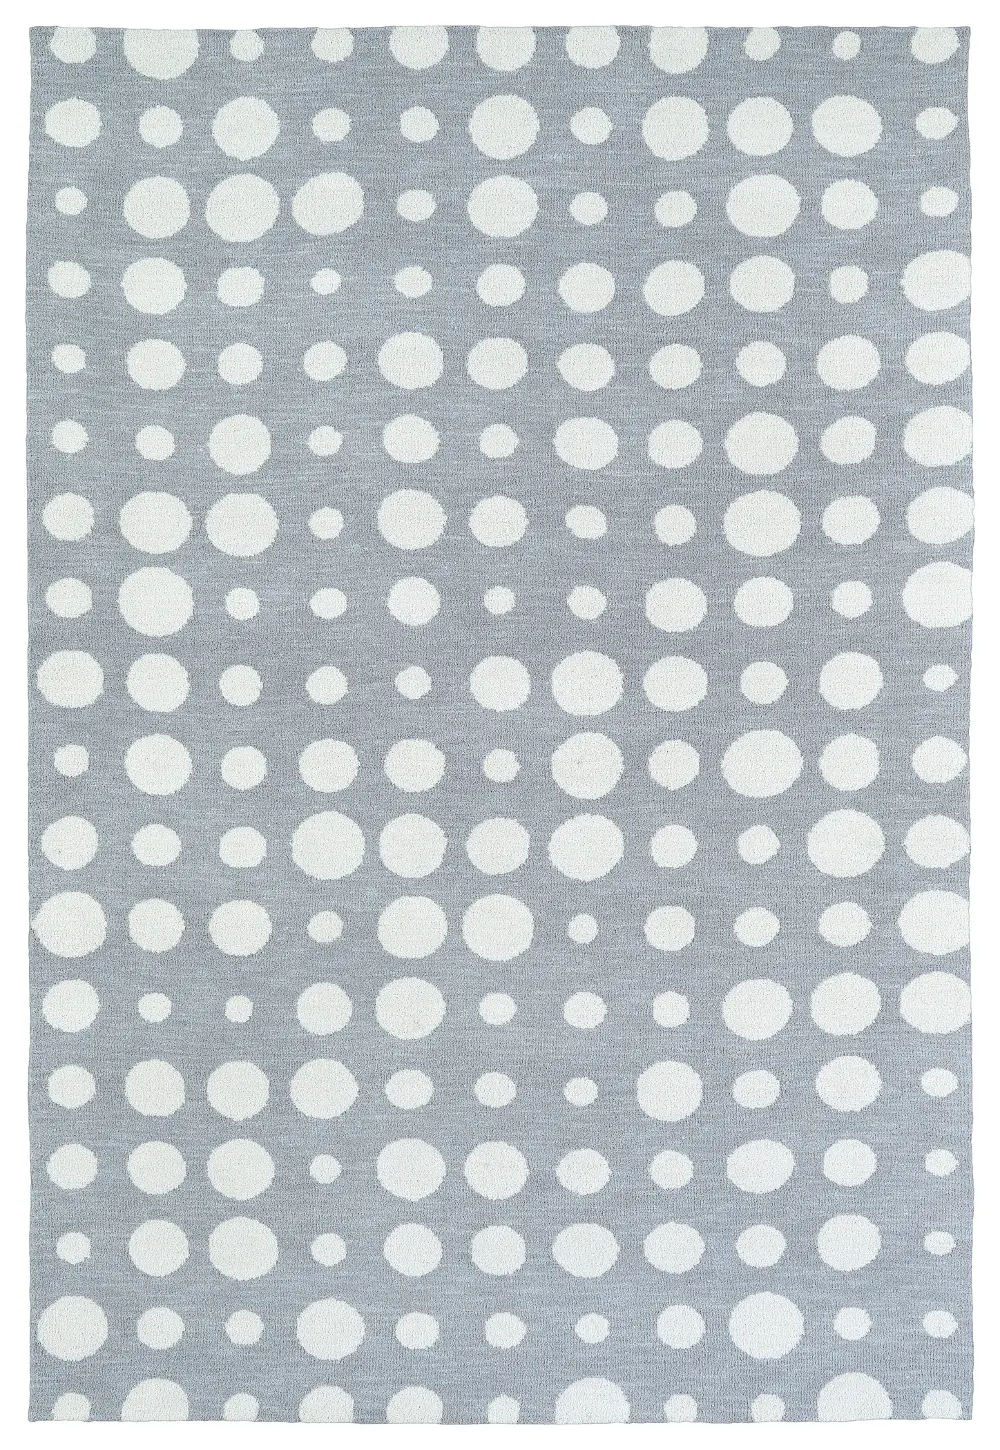 5 x 7 Medium Dotted Gray and Ivory Area Rug - Lily & Liam-1